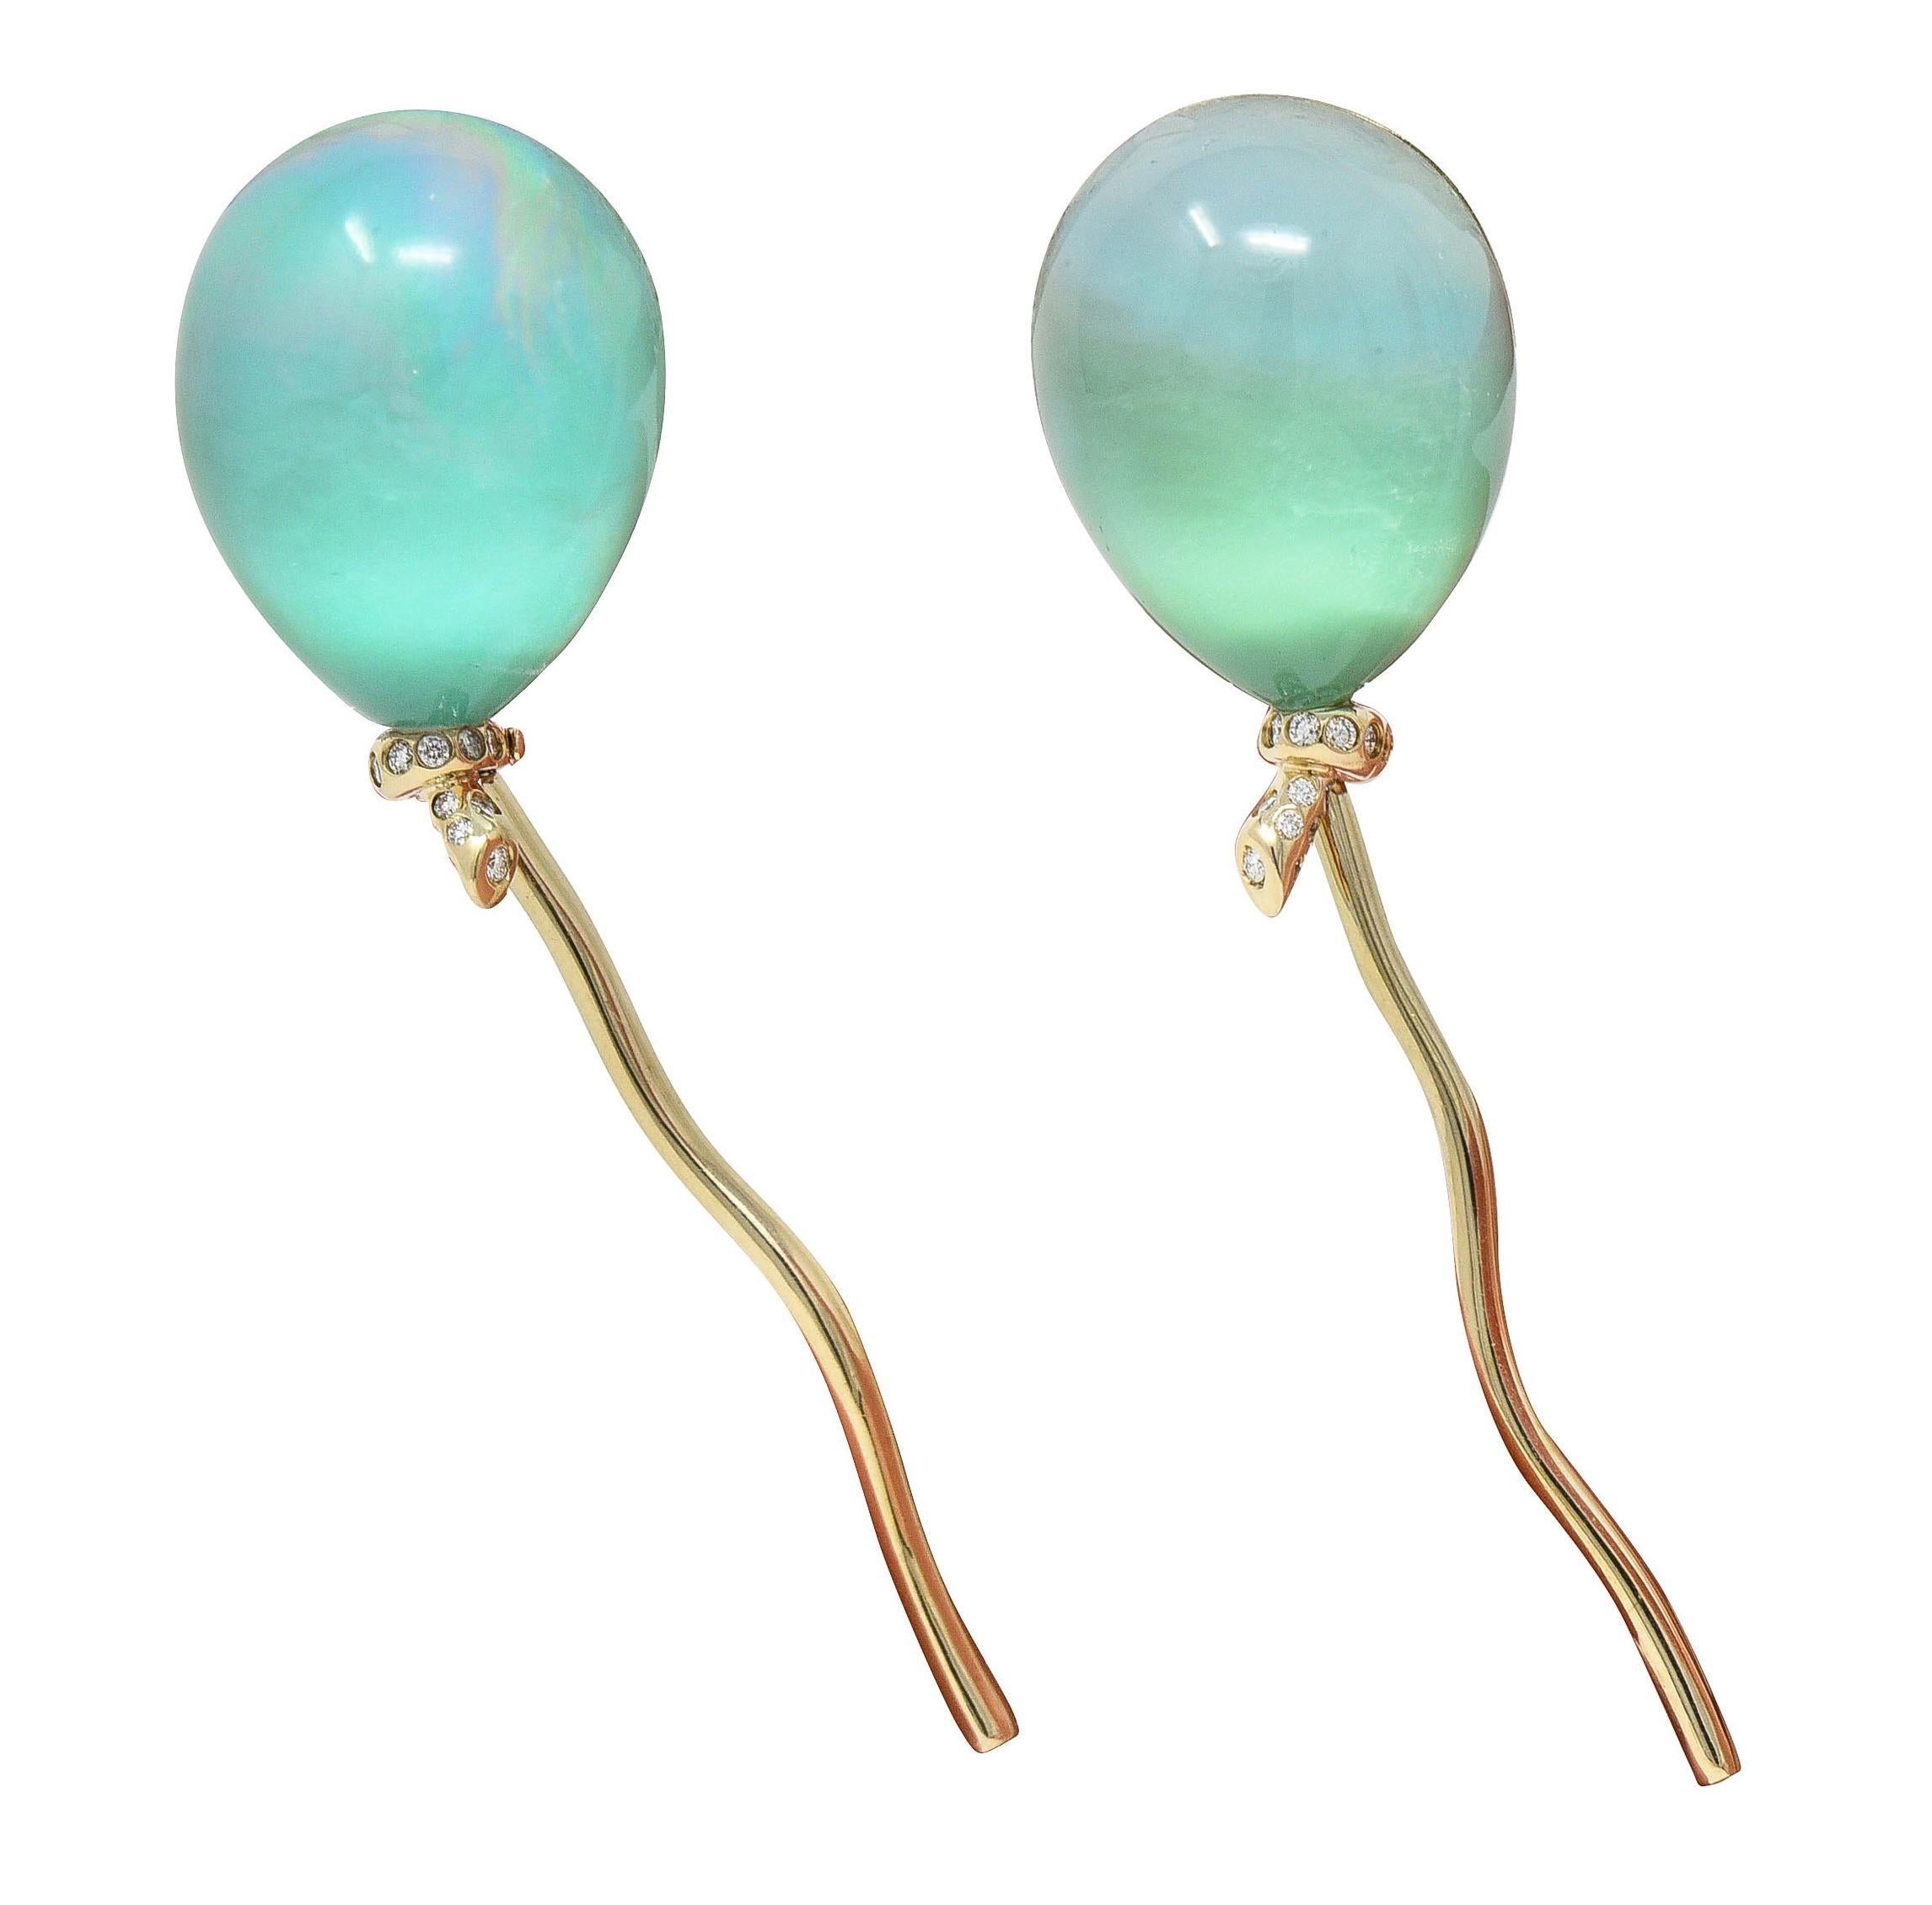 Designed as stylized balloons terminating with articulating gold ribbon tails
Featuring pear-shaped crystal quartz cabochons measuring 20.0 x 16.0 mm 
Transparent and colorless - backed by layered chrysoprase and abalone 
Displaying an iridescent